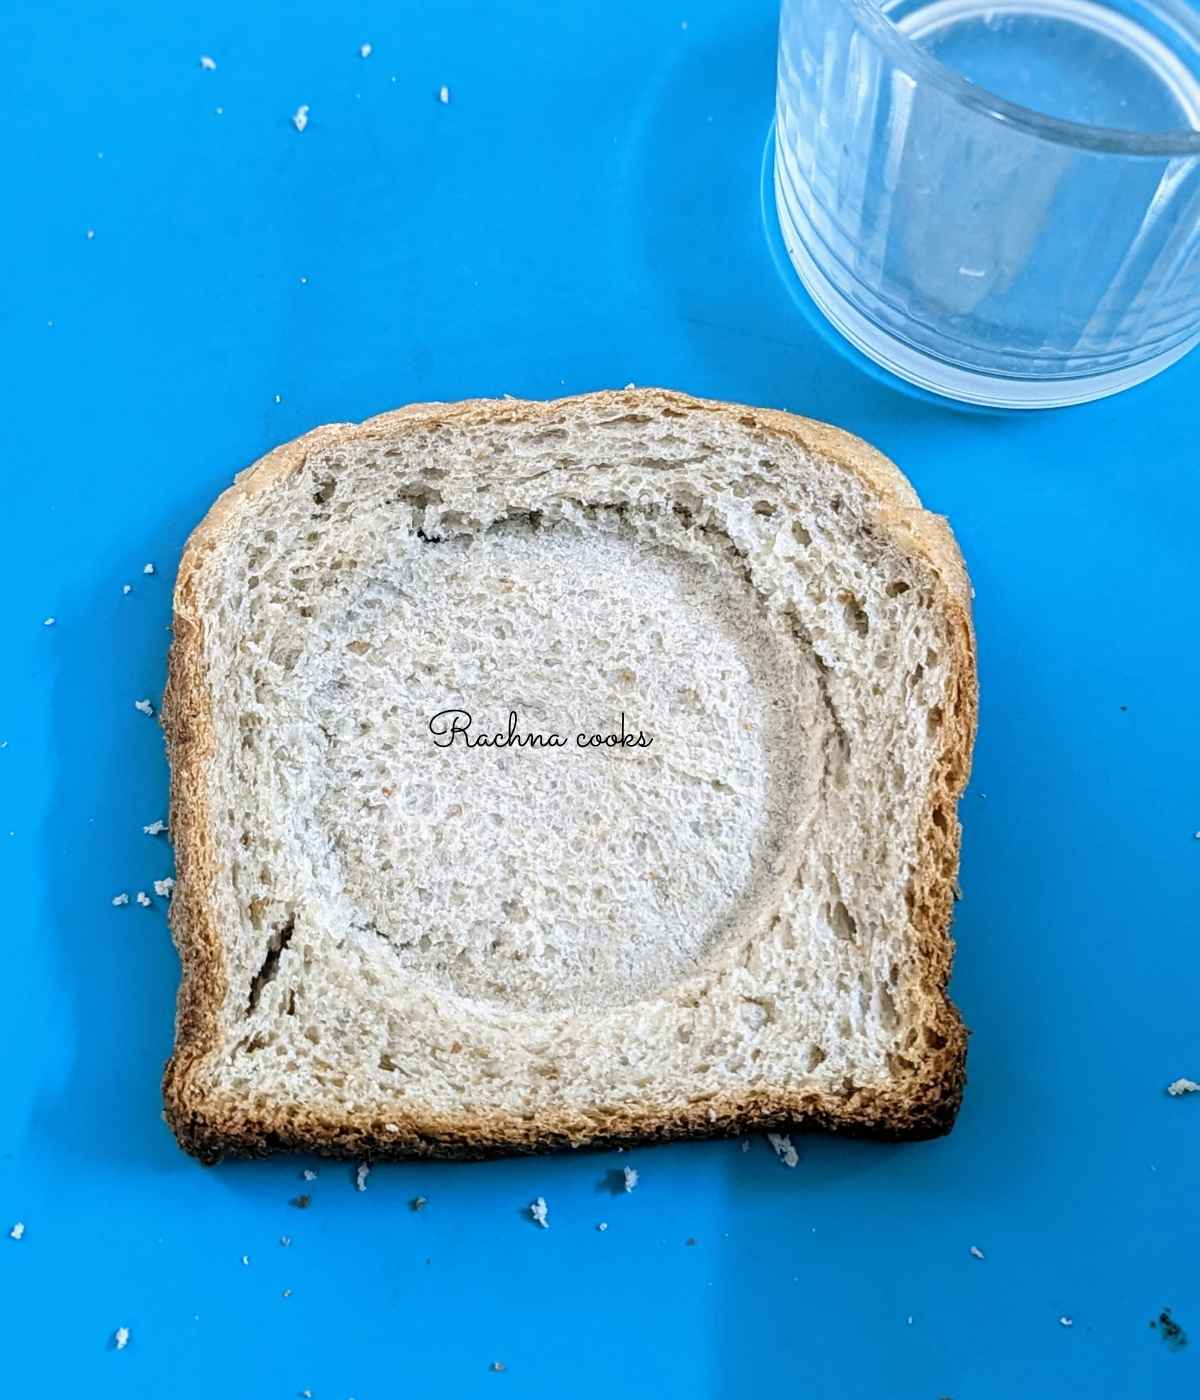 One slice of bread pressed down with glass in the centre to form a cavity.